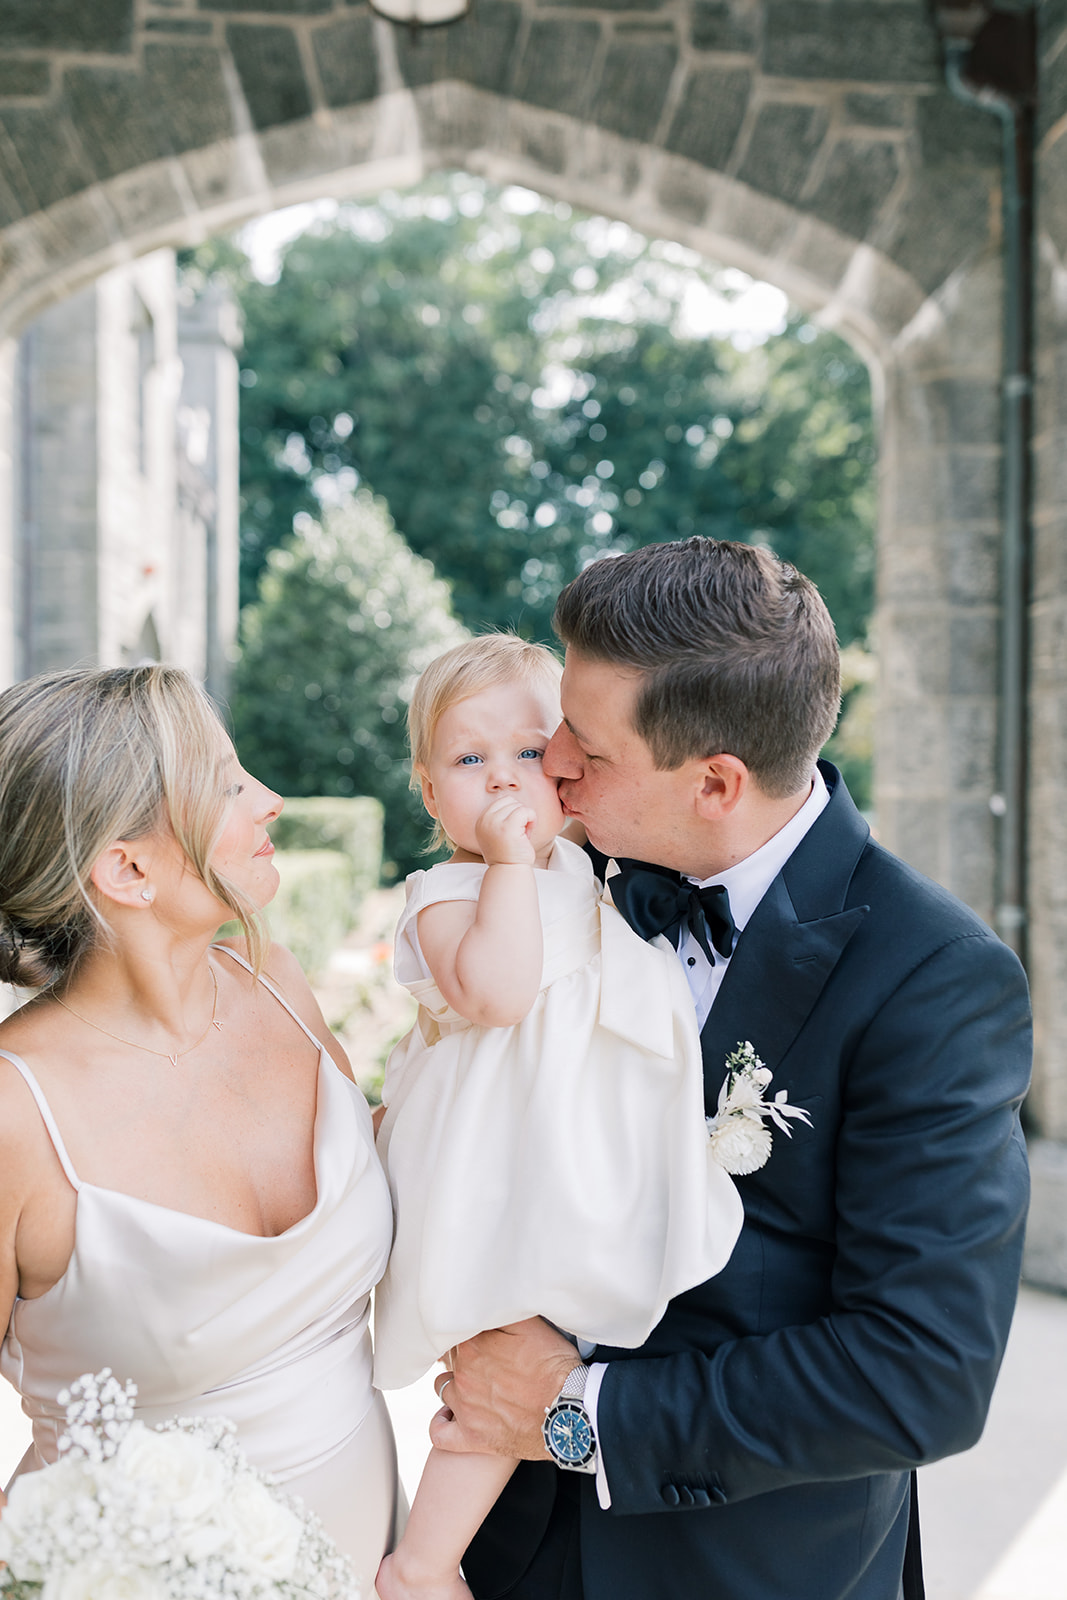 wedding party portraits at whitby castle in rye ny